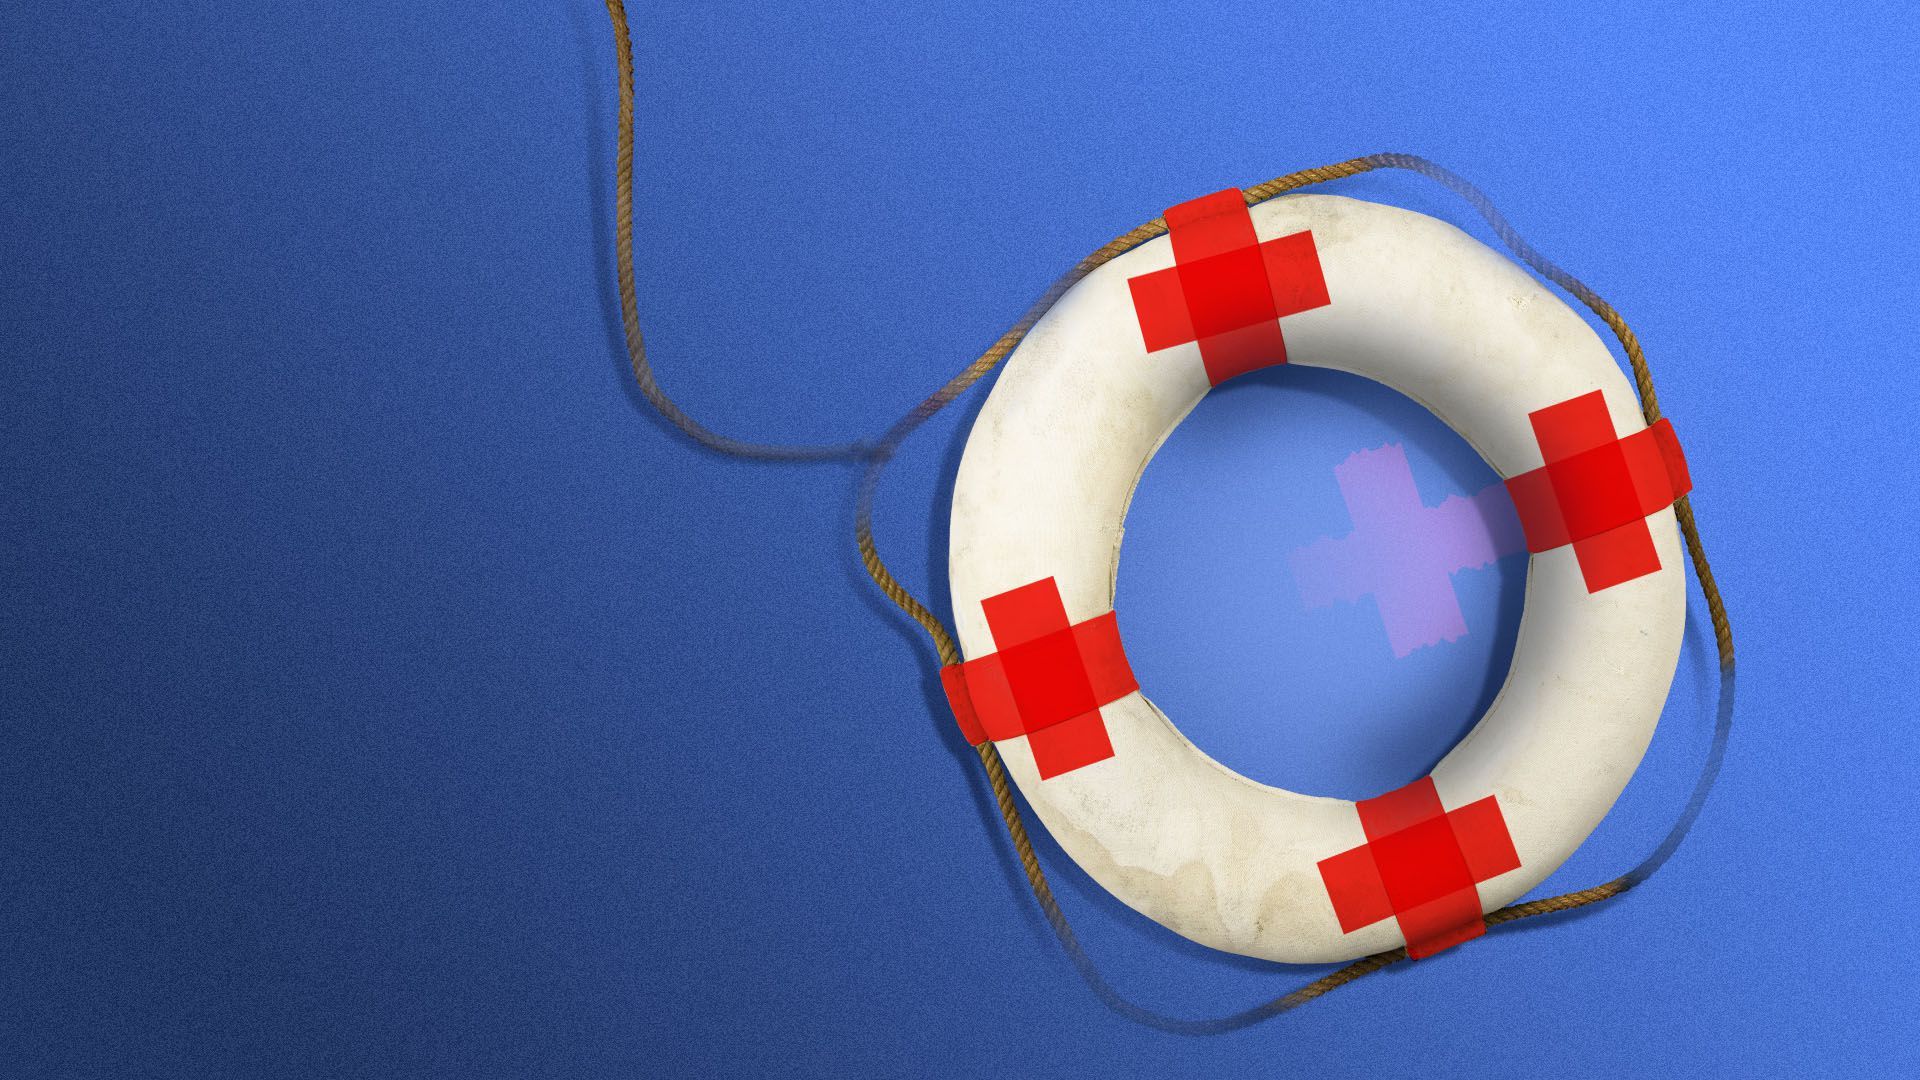 Illustration of a life ring with red cross symbols on it